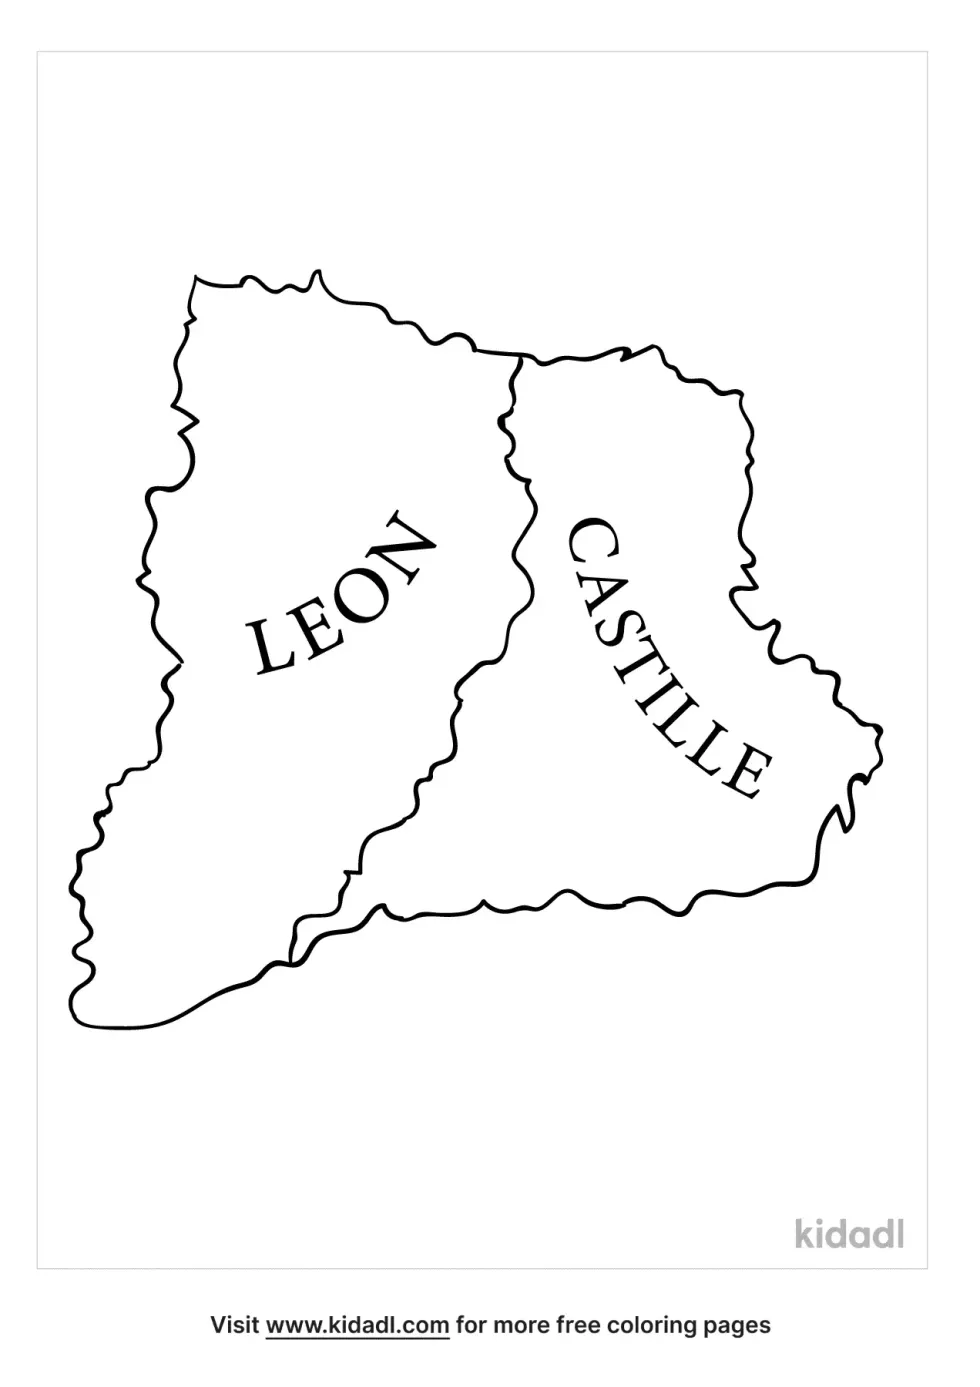 Kingdom Of Leon And Castile Coloring Page